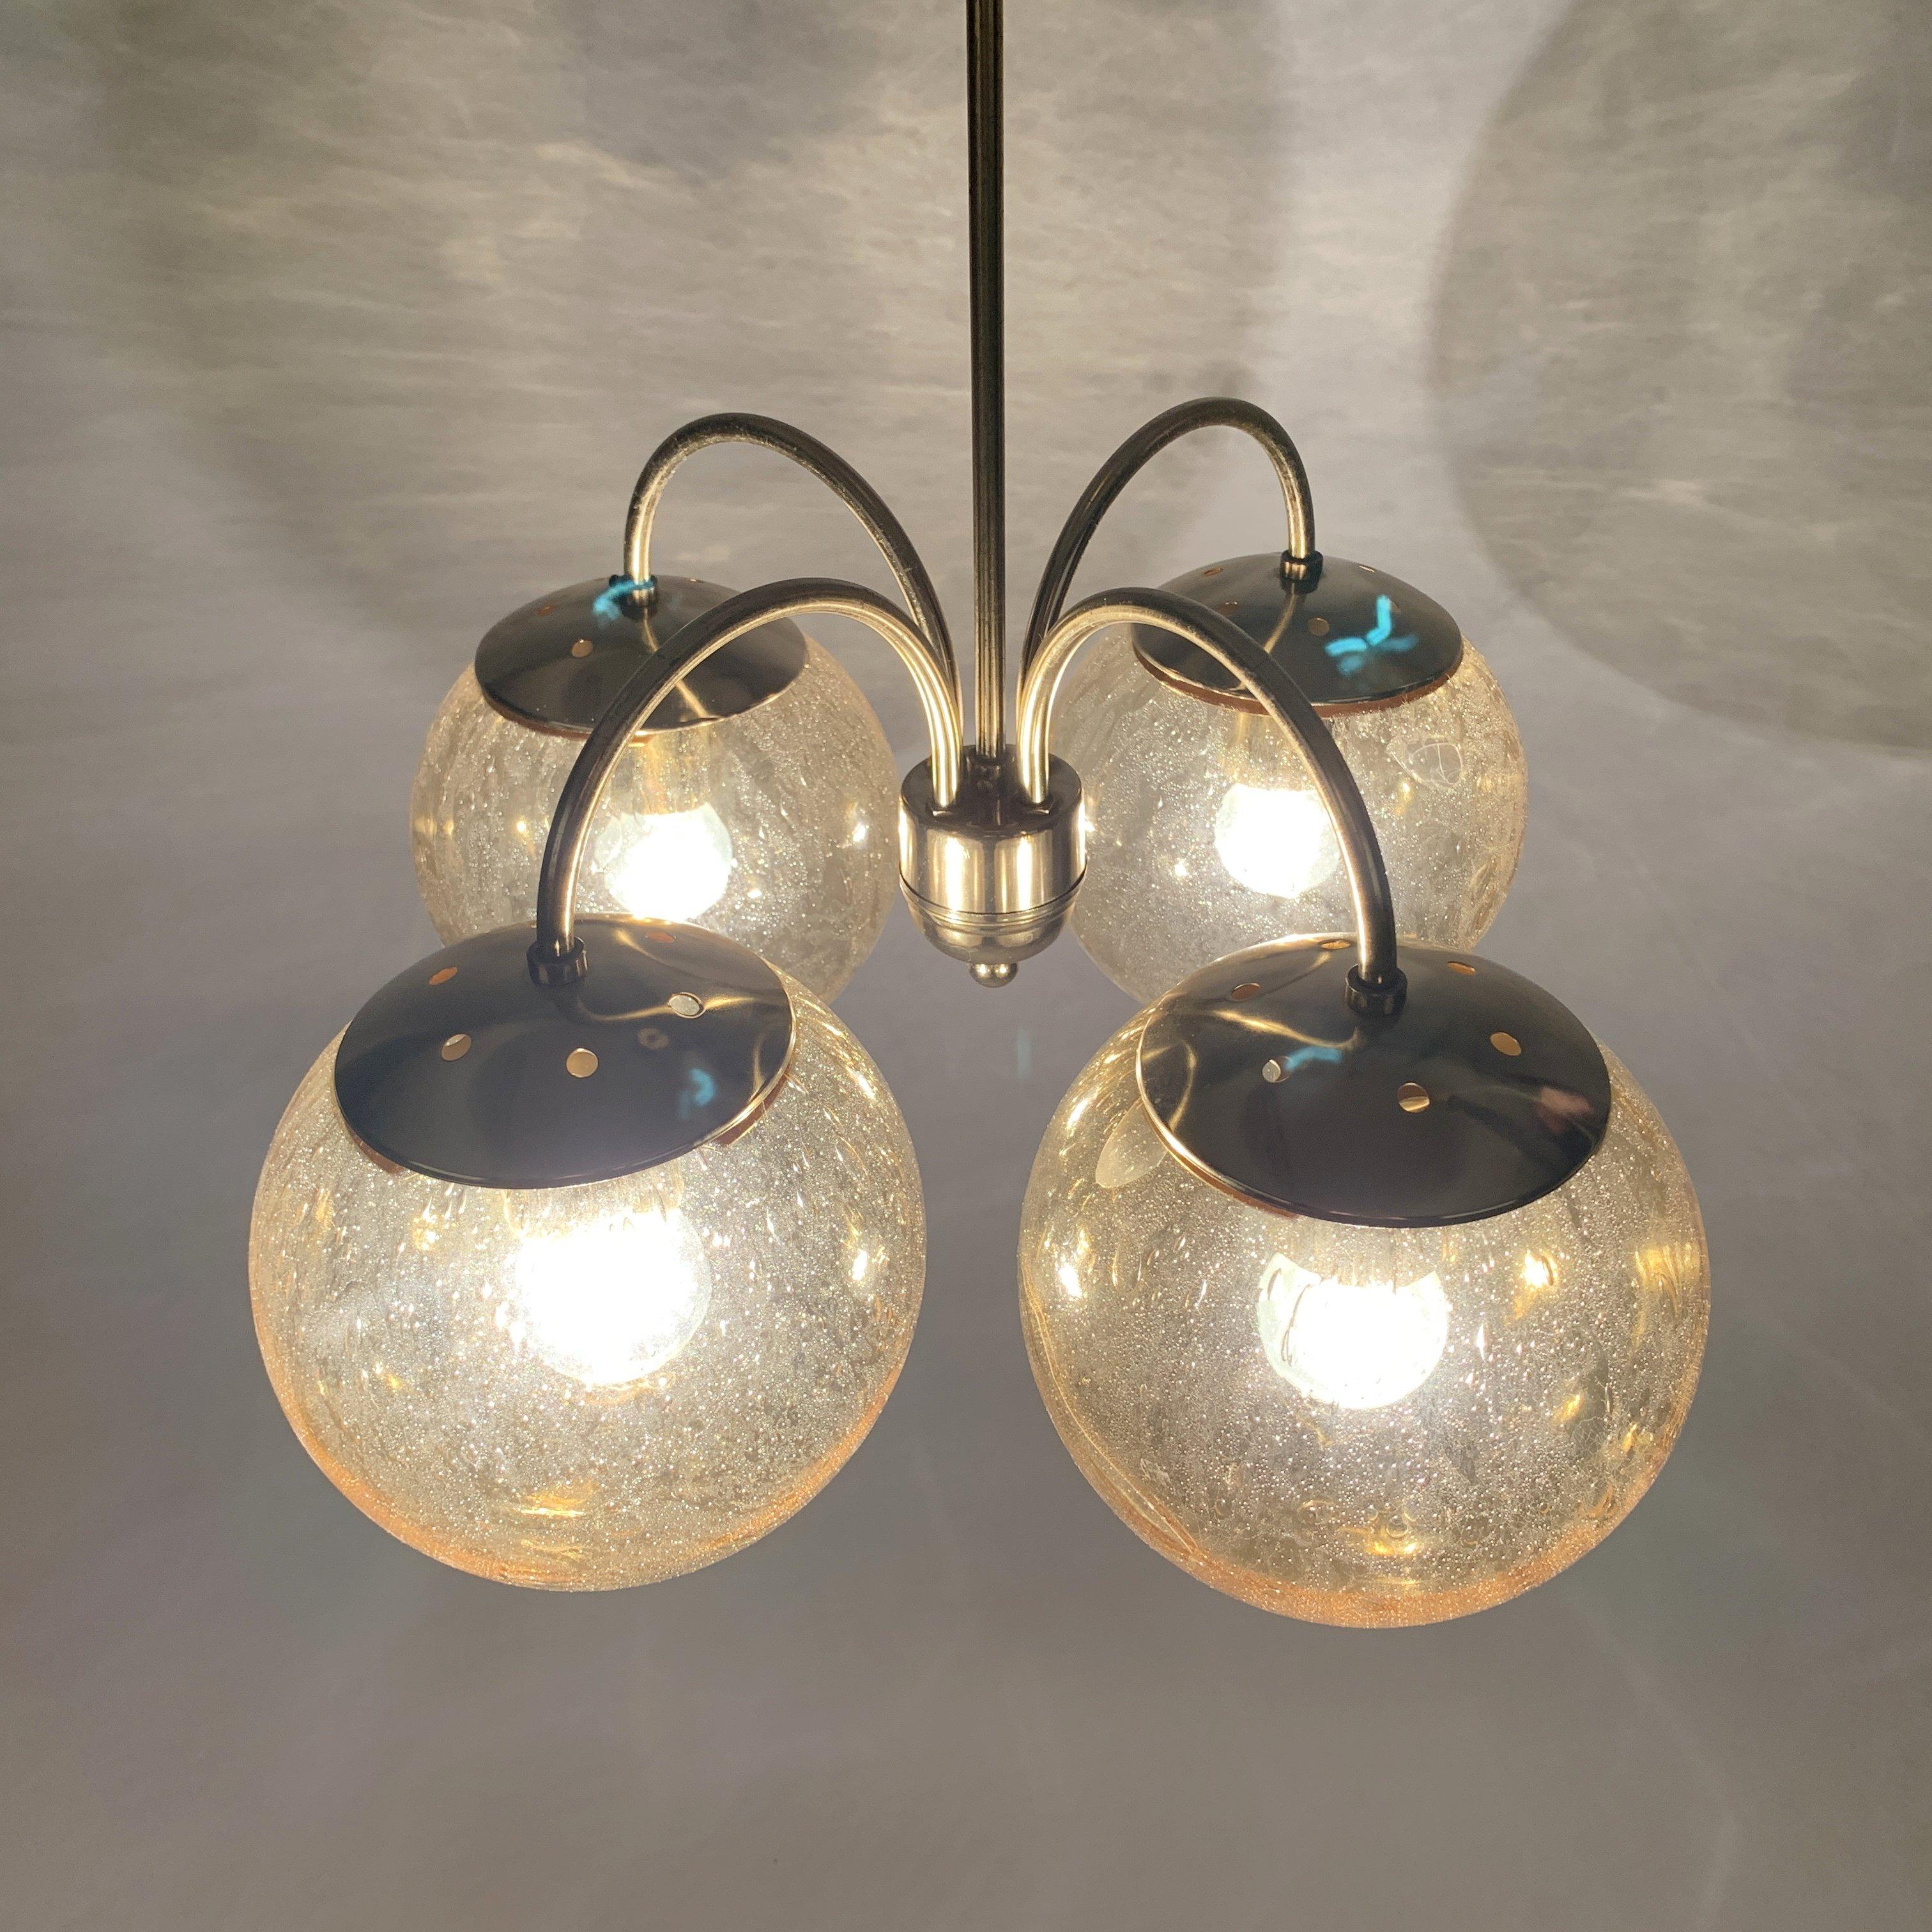 Beautiful midcentury chandelier made of glass and brass. Fully functional. Good original condition.
Bulbs: 4 x E27 or E26.